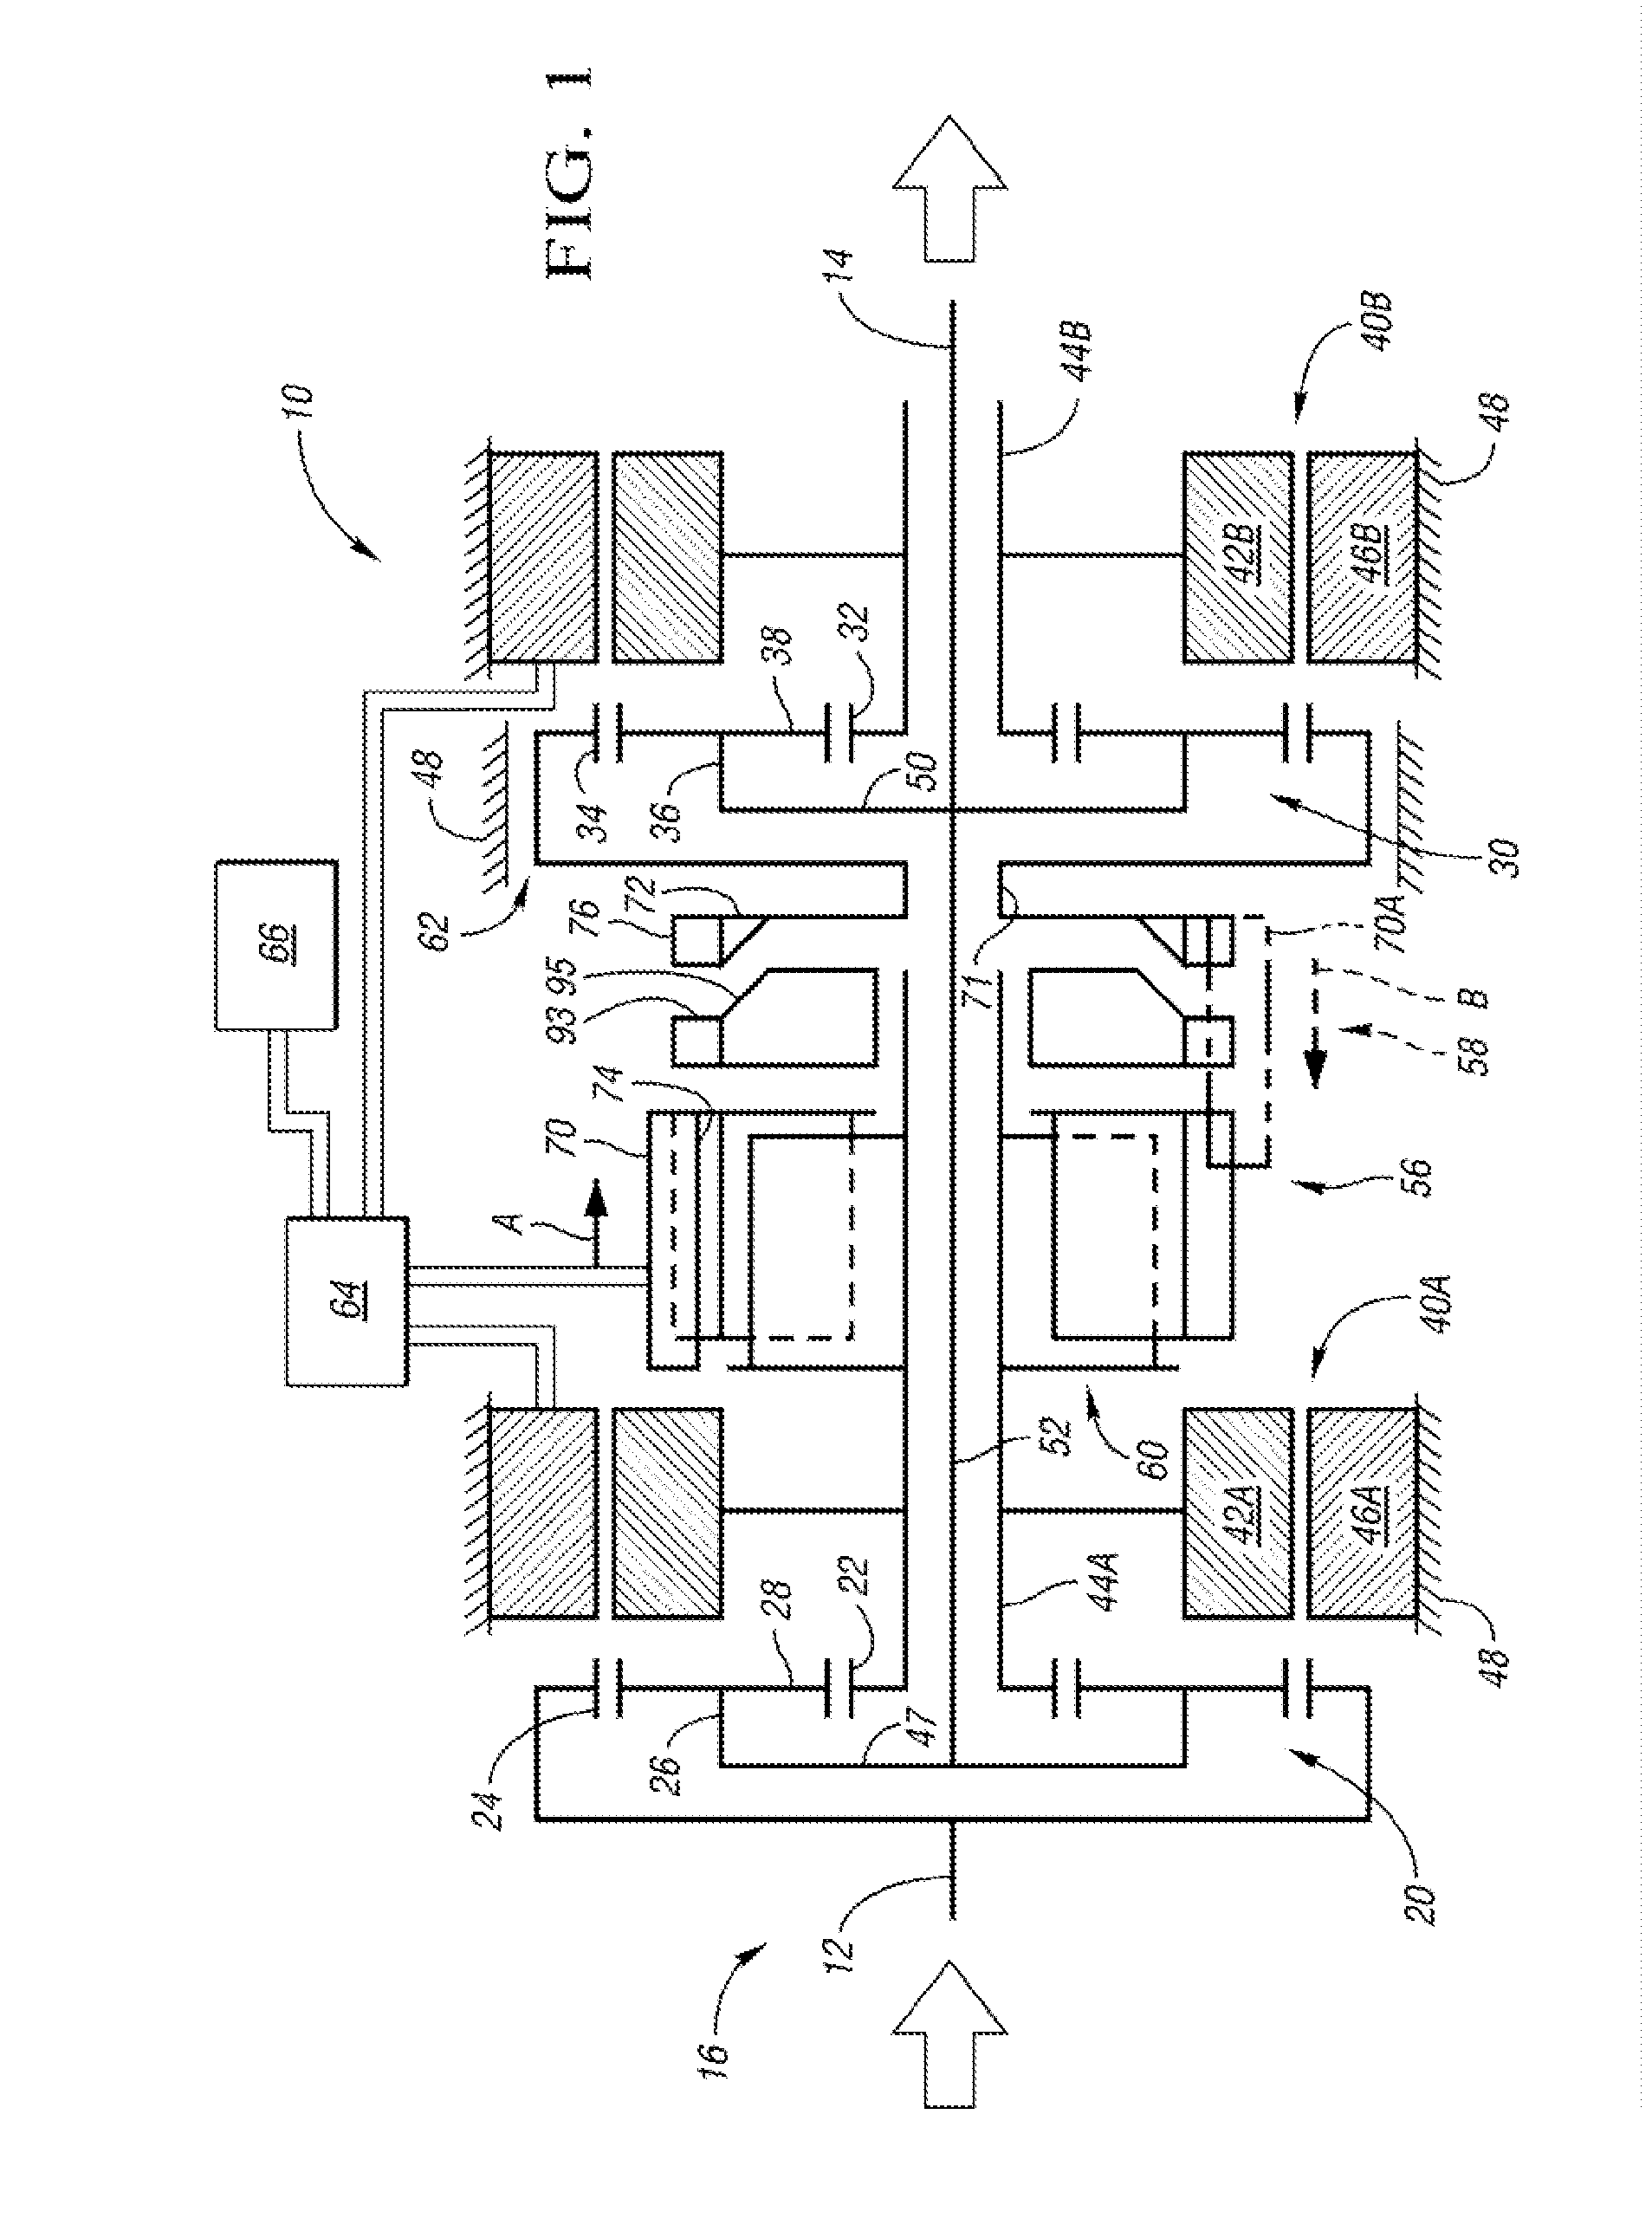 Torque-transmitting assembly with dog clutch and hydrostatic damper and electrically variable transmission with same